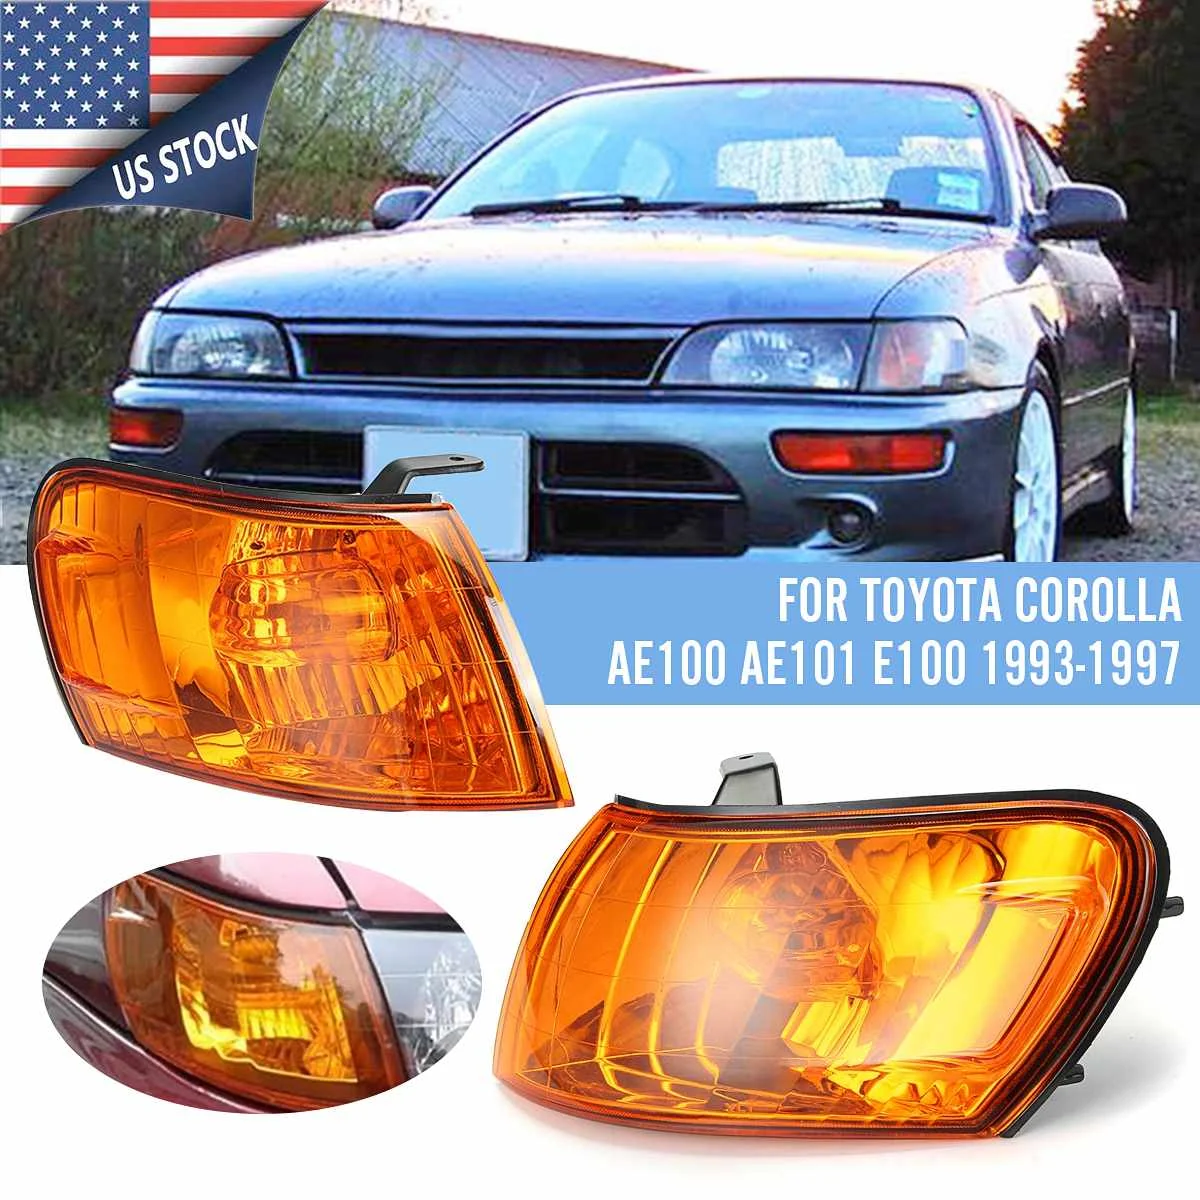 Pair Car Front Corner Lamp Lights Fit for Toyota Corolla AE100 E100 AE101 1993 1994 1995 1996 1997 Signal Lamp No wire harness